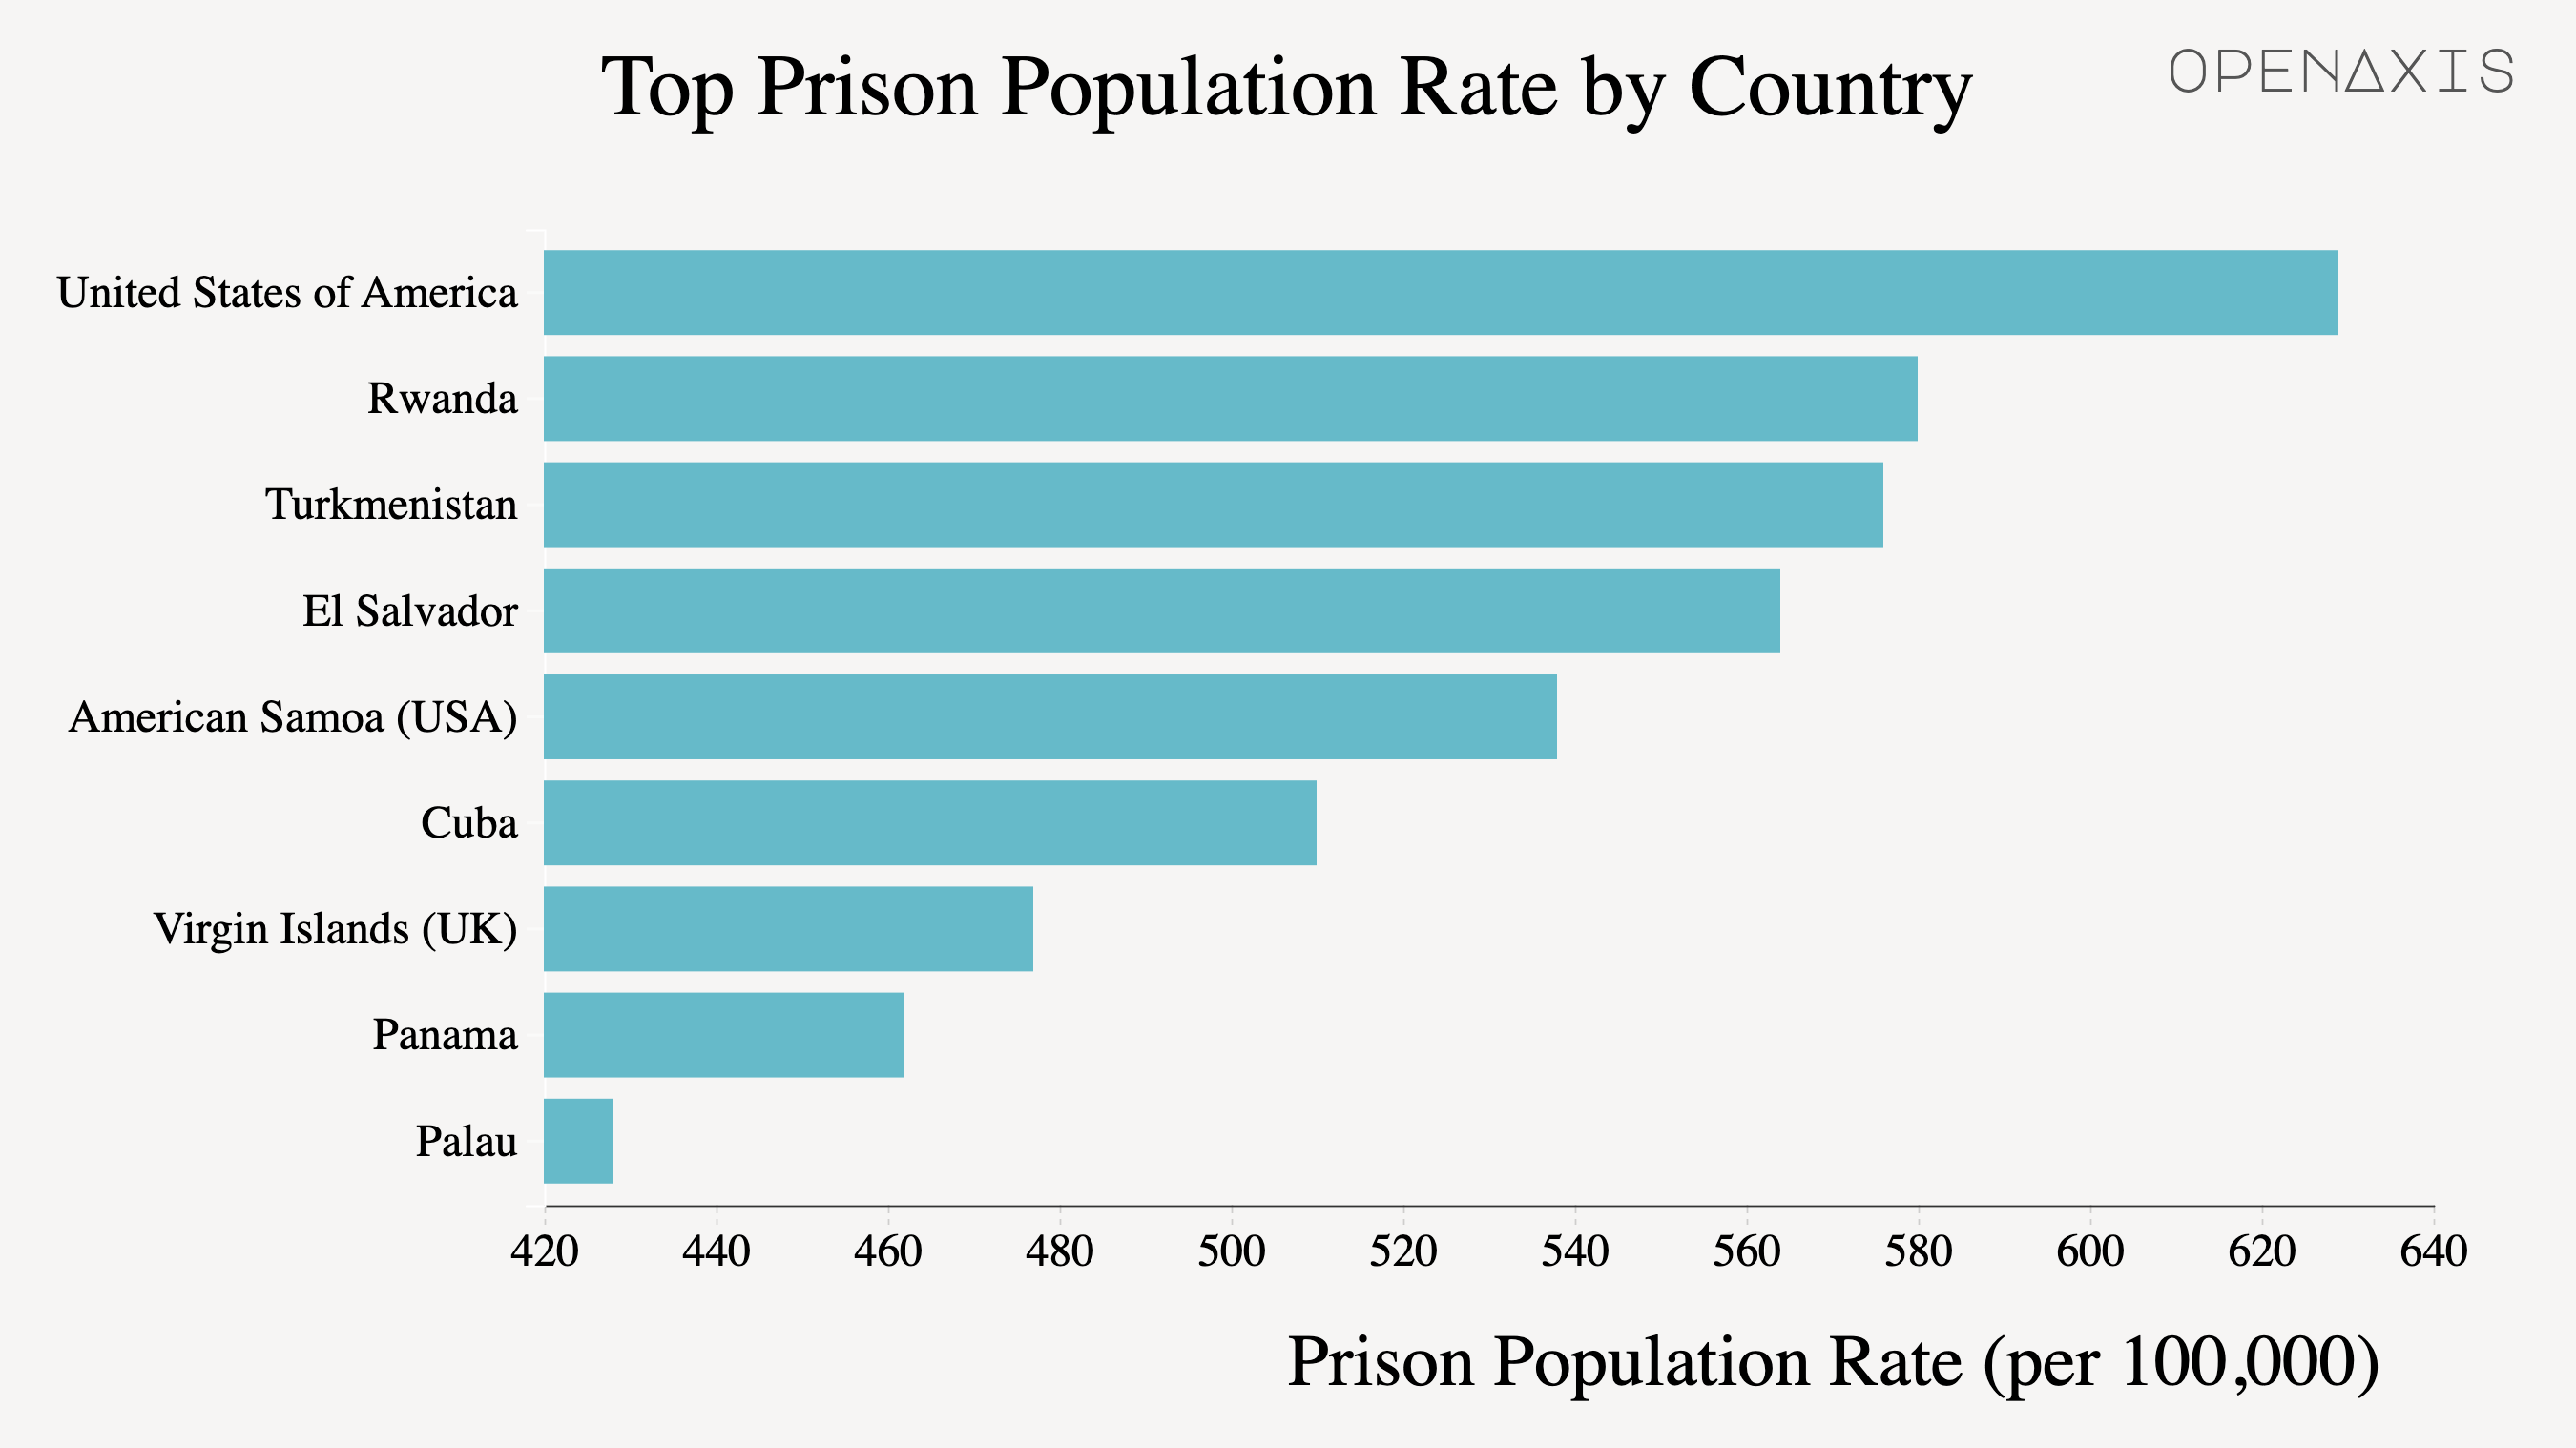 <p>Source: <a href="https://www.prisonstudies.org/highest-to-lowest/prison_population_rate?field_region_taxonomy_tid=All" target="_blank">World Prison Brief</a></p>